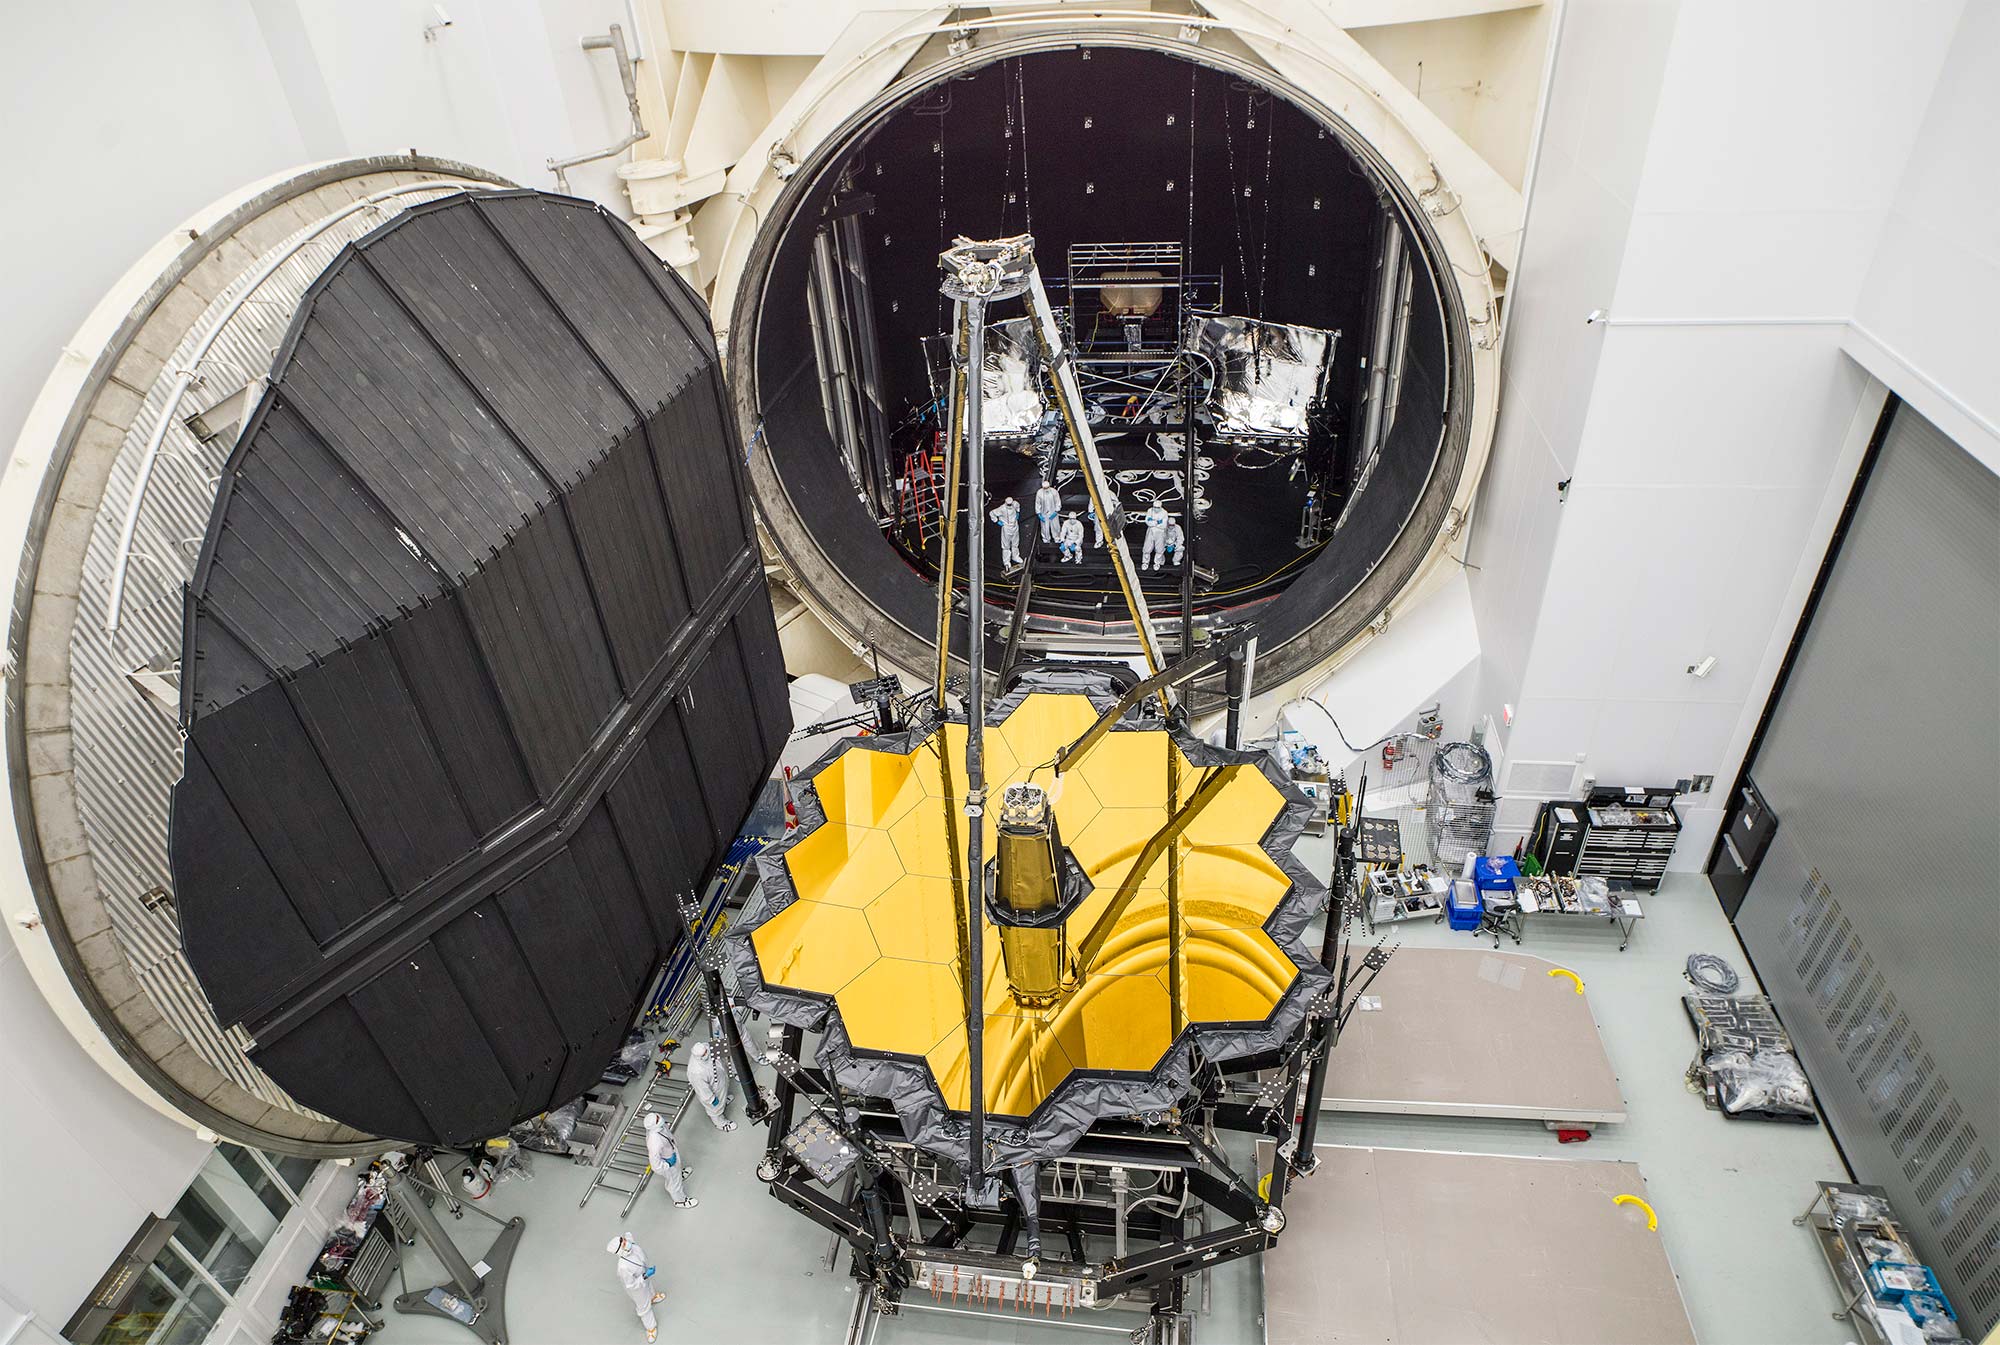 The Webb telescope emerged from a vacuum chamber at NASA’s Johnson Space Center in Houston on December 1, 2017, after about 100 days of cryogenic testing.